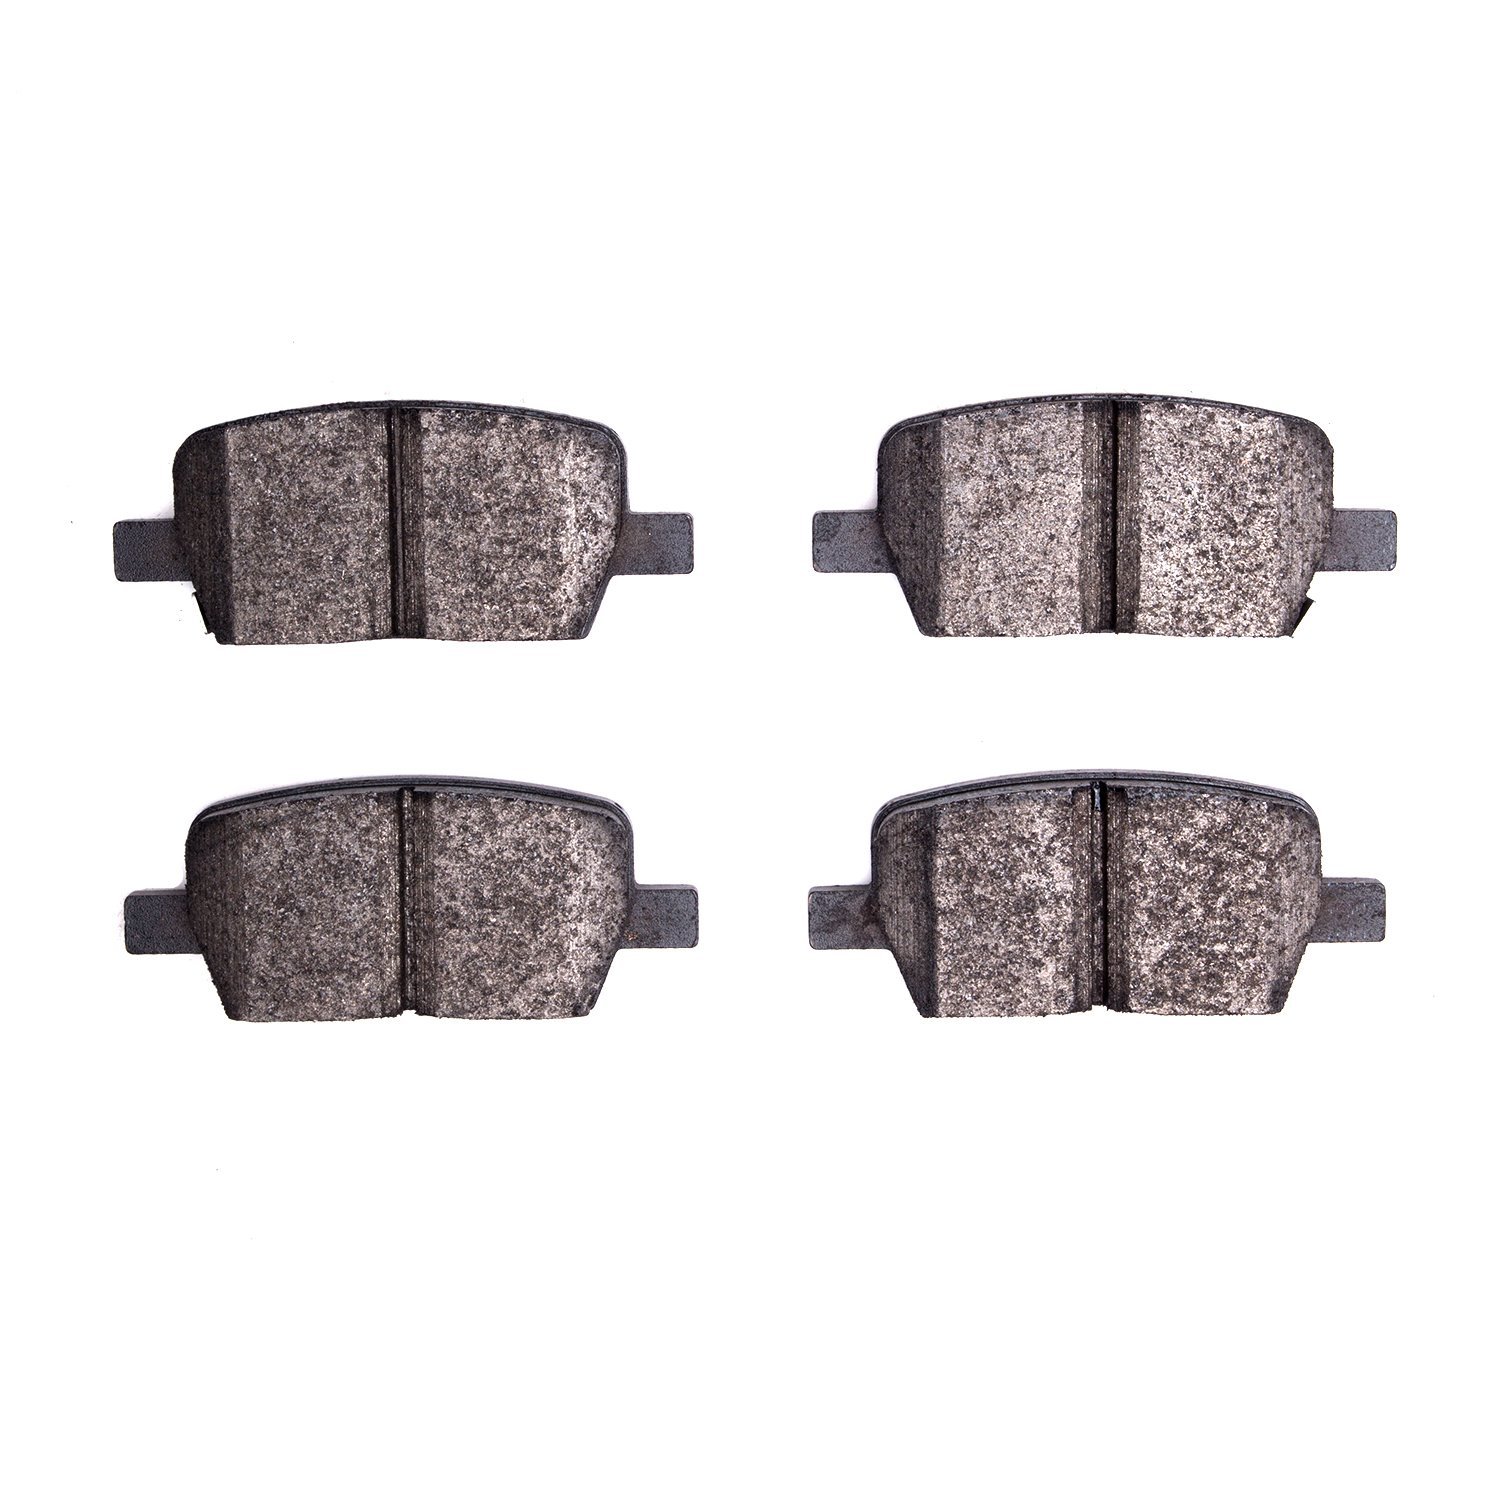 Track/Street Brake Pads, Fits Select GM, Position: Rear